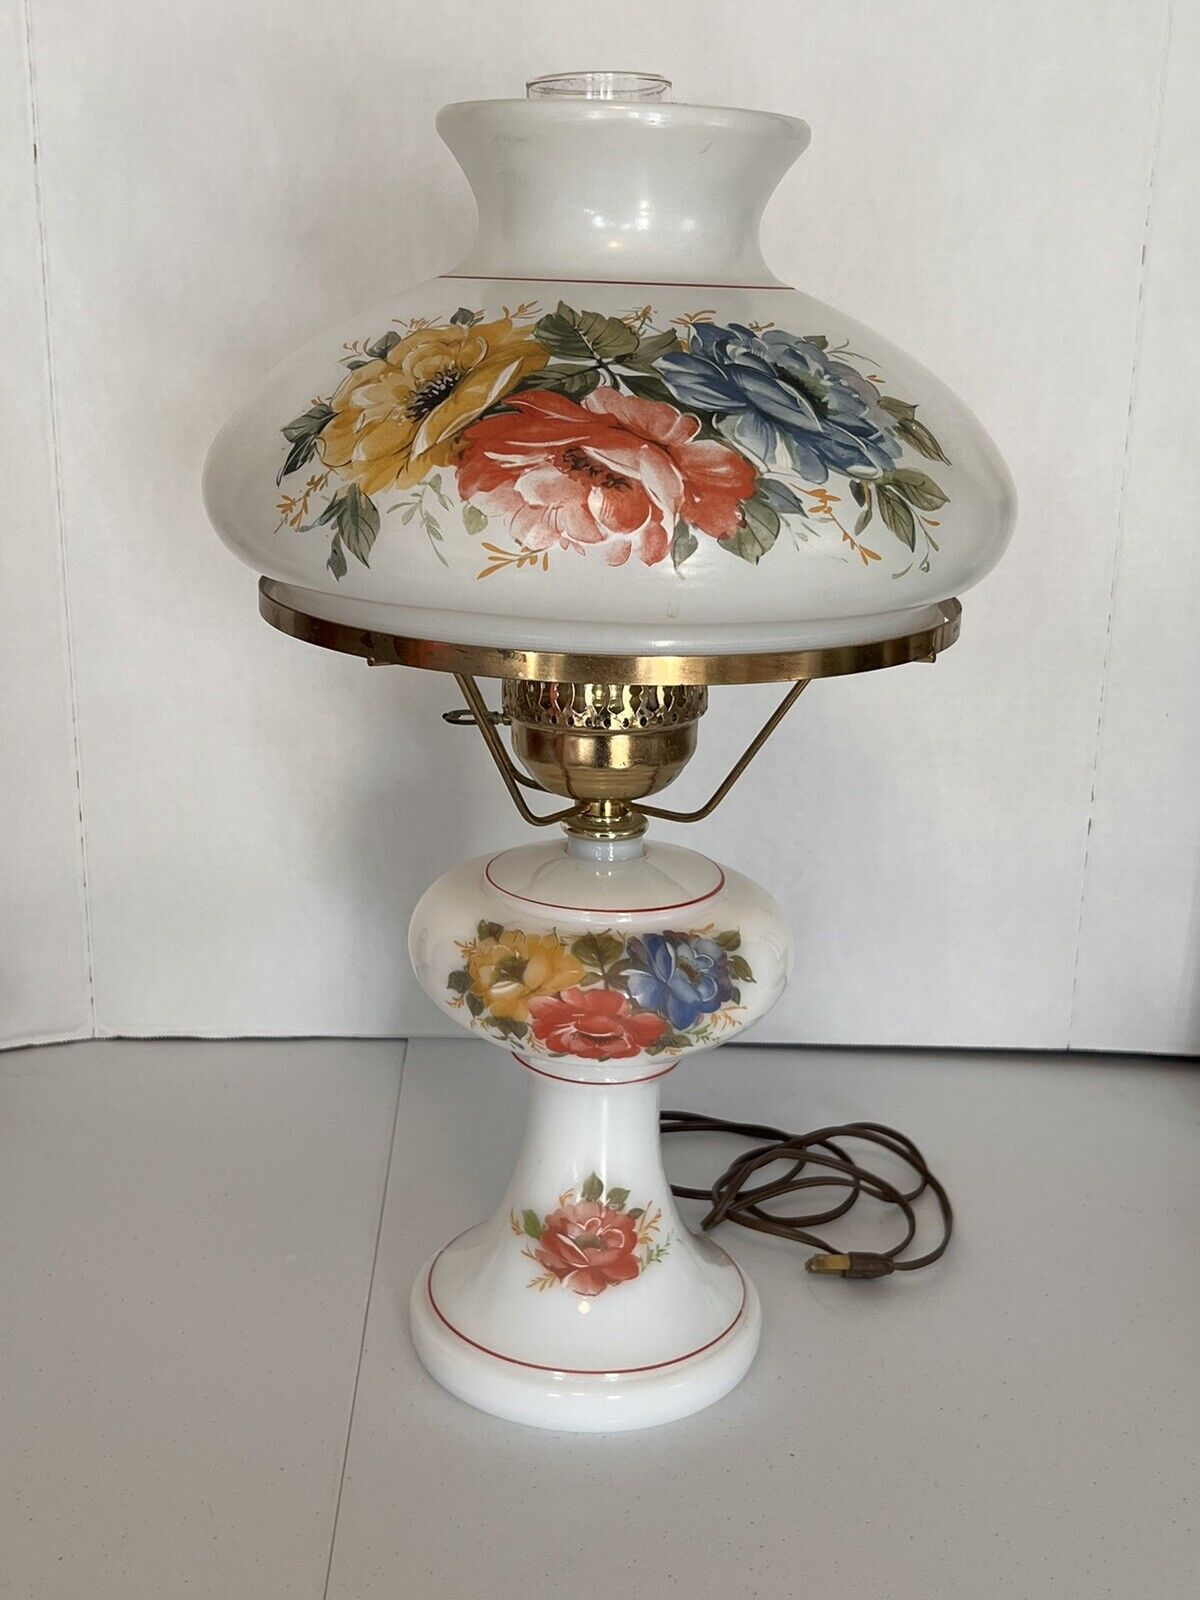 Vintage Glass Hurricane Parlor Lamp, Gone With the Wind, White Floral